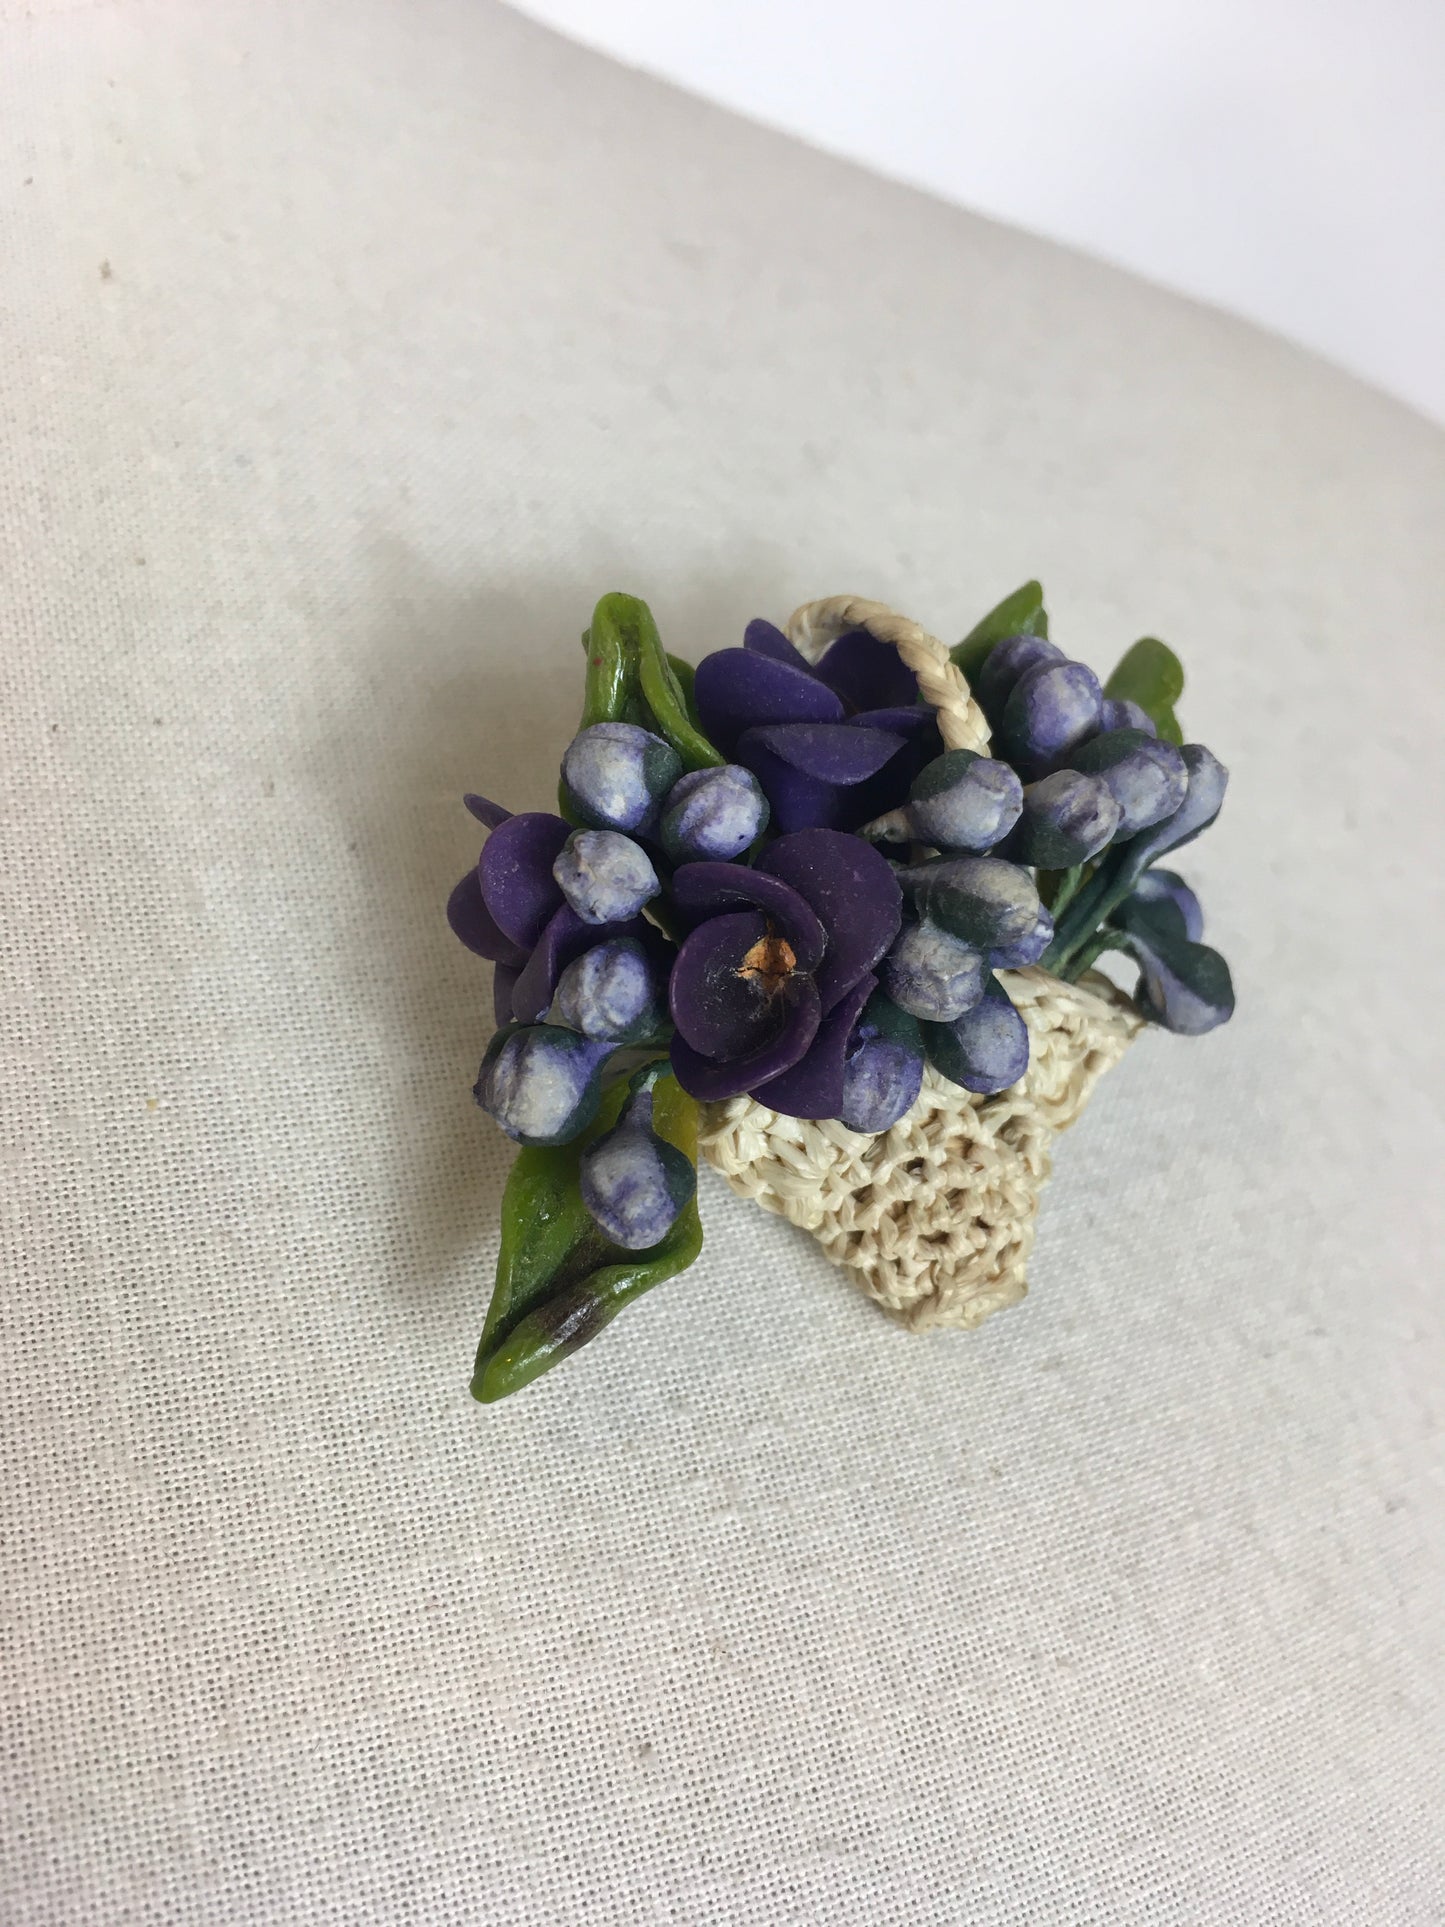 Original 1940’s Basket Brooch With Floral Bouquet - In A Stunning Range of Purples, Straw & Green